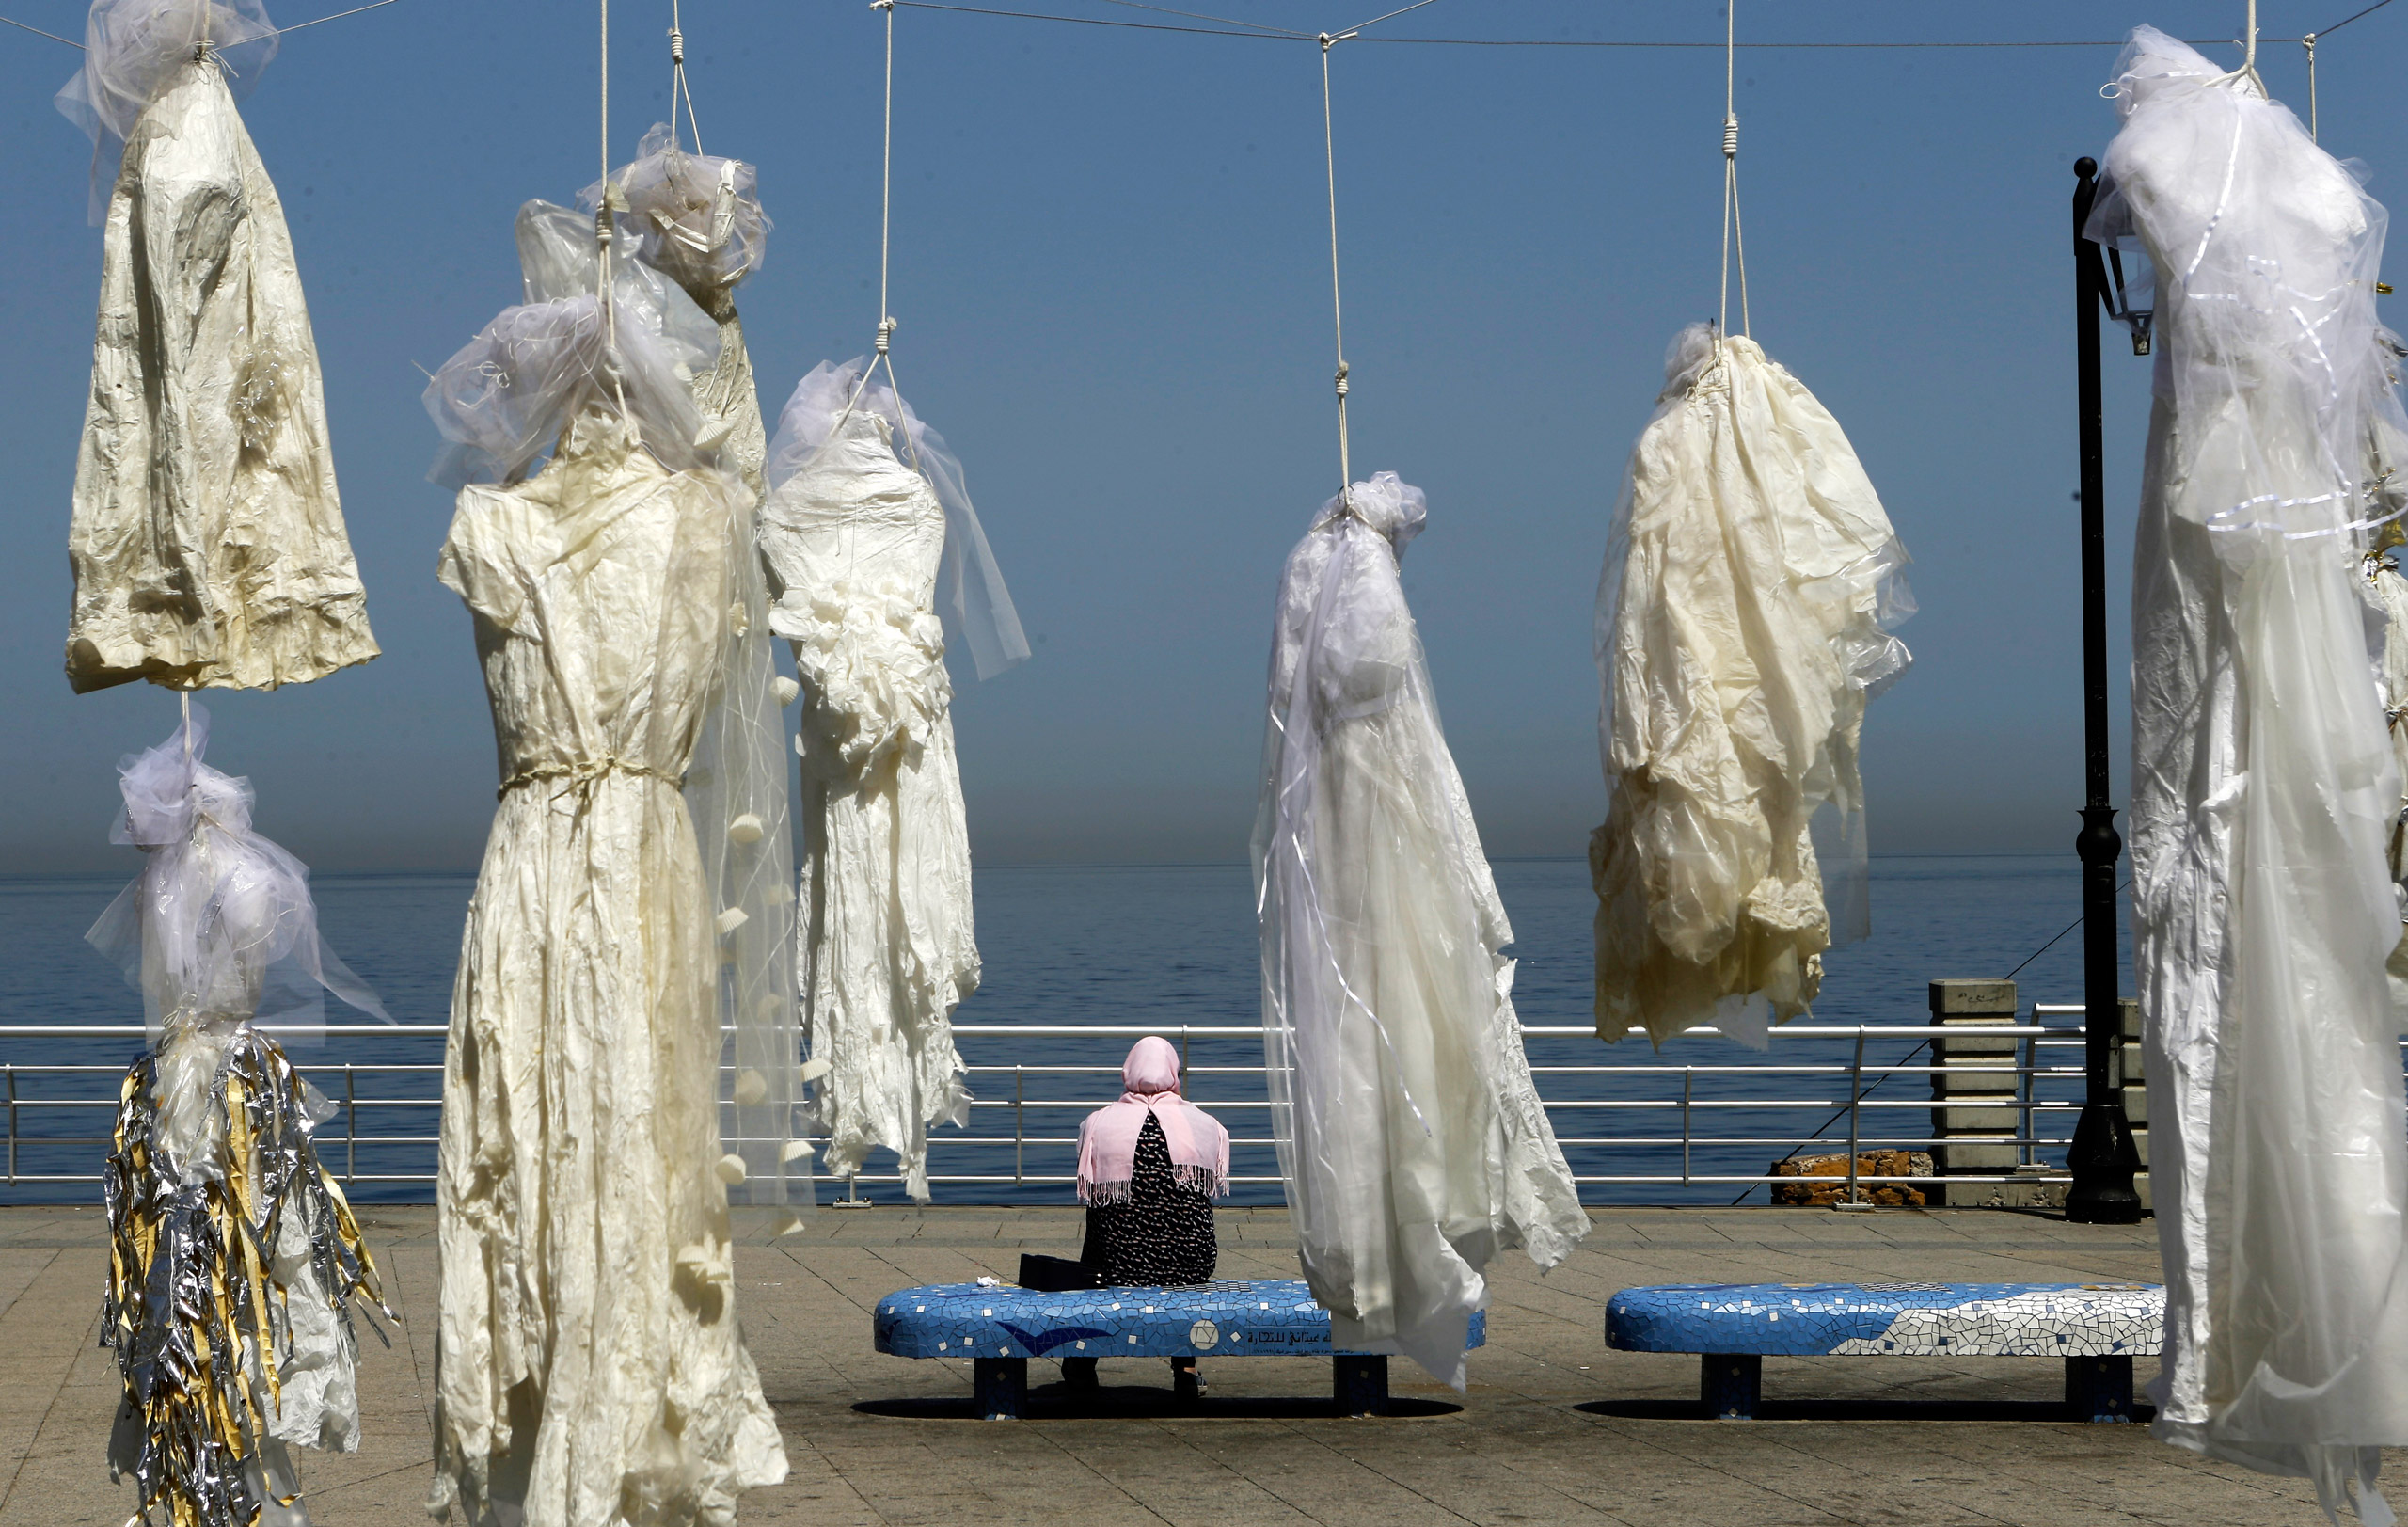 Artist Mirelle Honein and non-profit Abaad campaigned against Lebanon’s law on rape by hanging wedding dresses on nooses in Beirut (Patrick Baz&mdash;AFP/Getty Images)